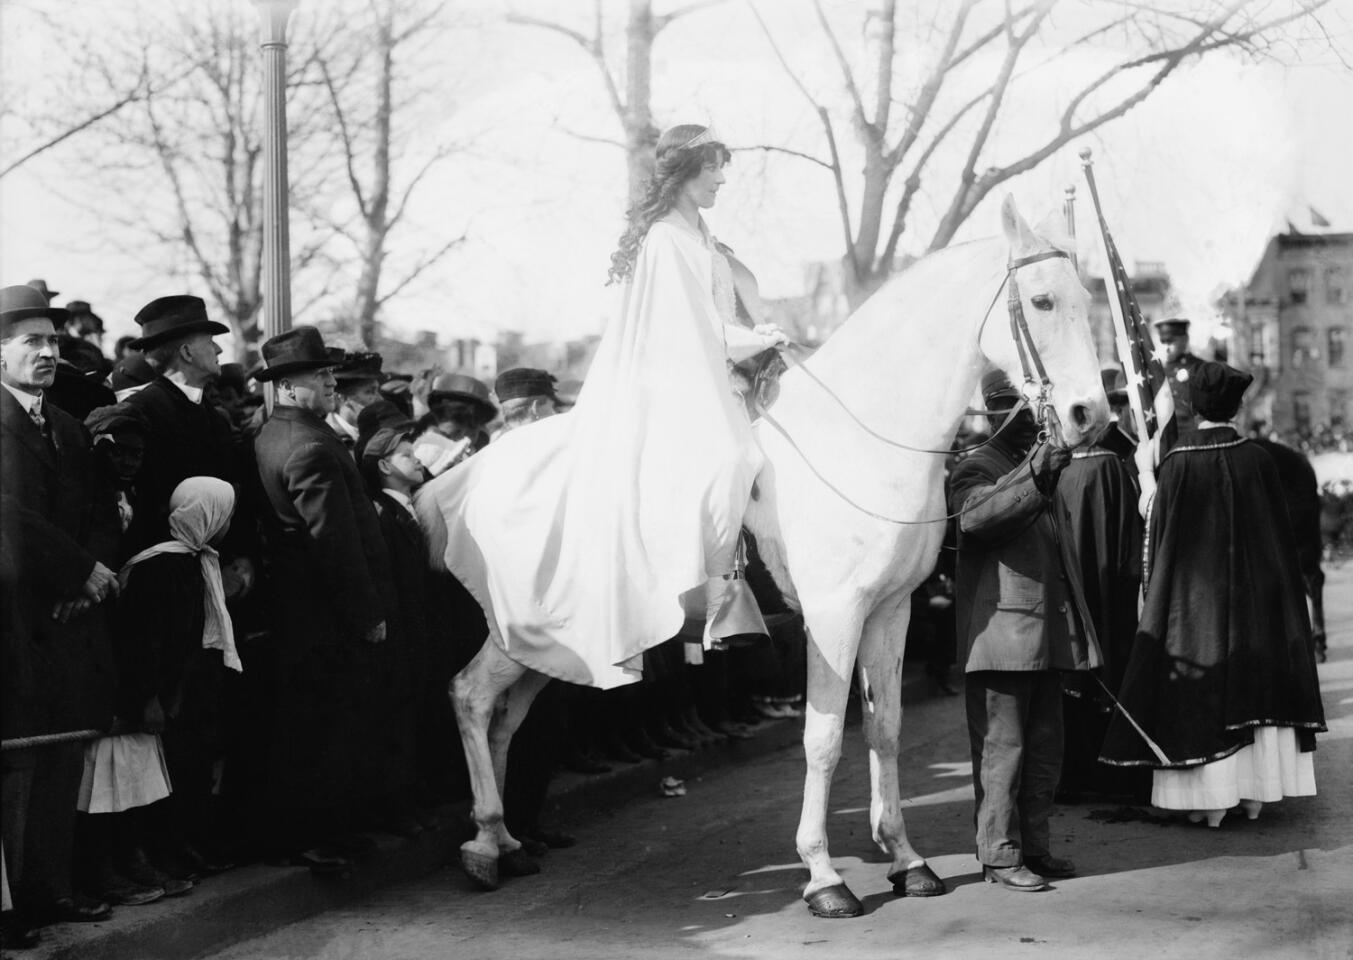 On March 3, 1913, 5,000 women marched in Washington to support the right of women to vote. Lawyer Inez Milholland led the procession in a white cape astride a white horse. Ceremonies in Washington on March 3, 2013 will honor the event.